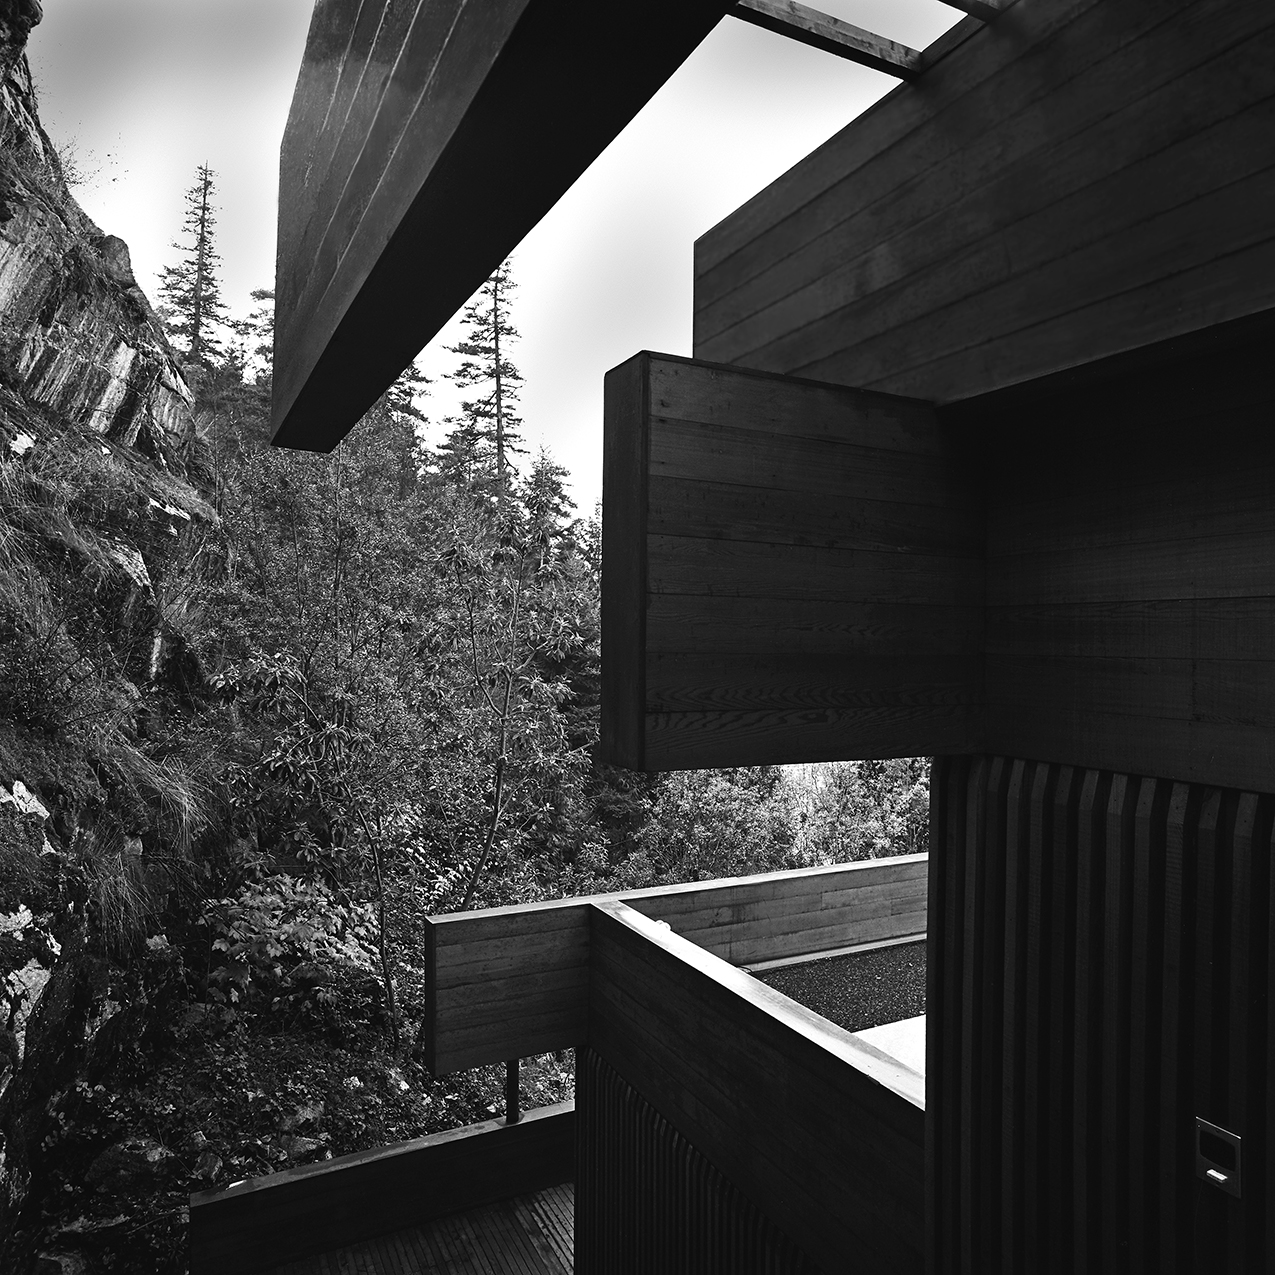 Graham Residence, Erickson/ Massey Architects, 1962. Photo: Selwyn Pullan. Collection of West Vancouver Art Museum.